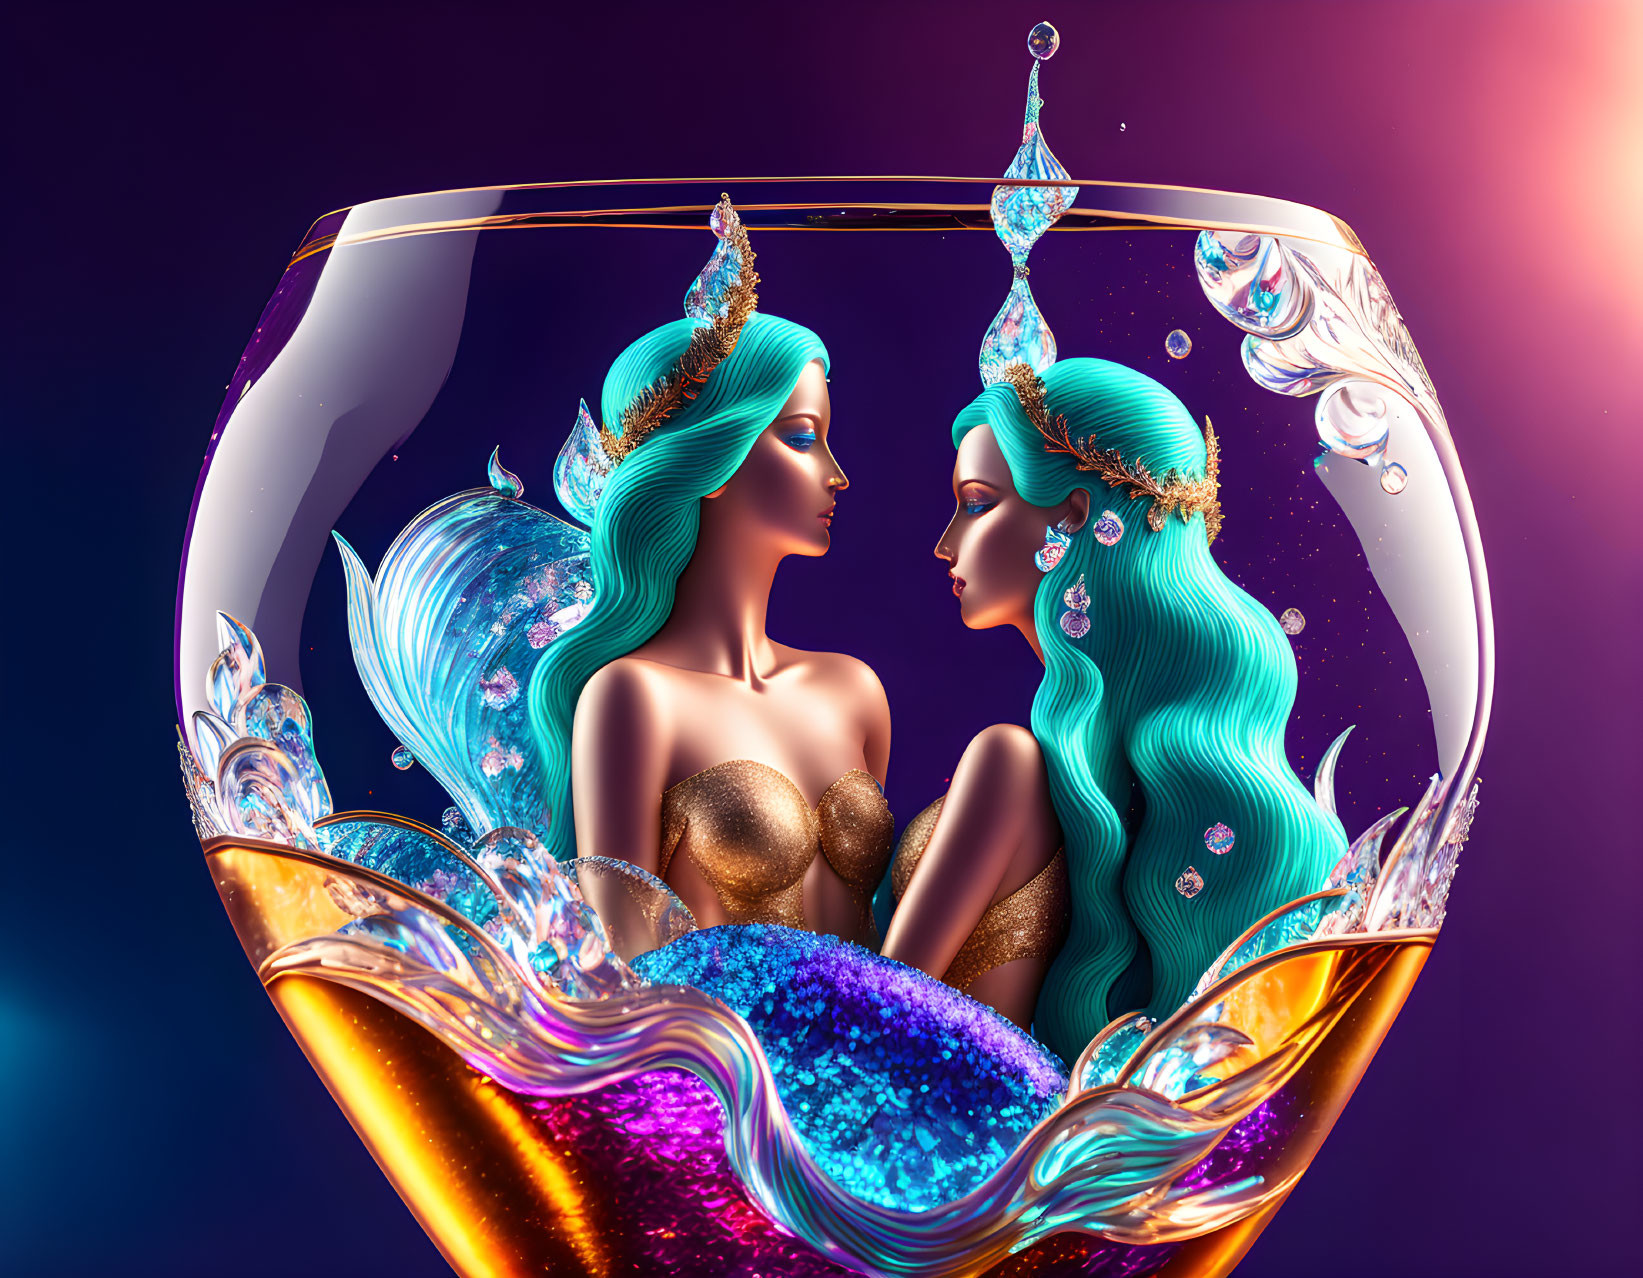 Fantastical mermaid figures with glittering tails and ornate crowns in wine glass on purple